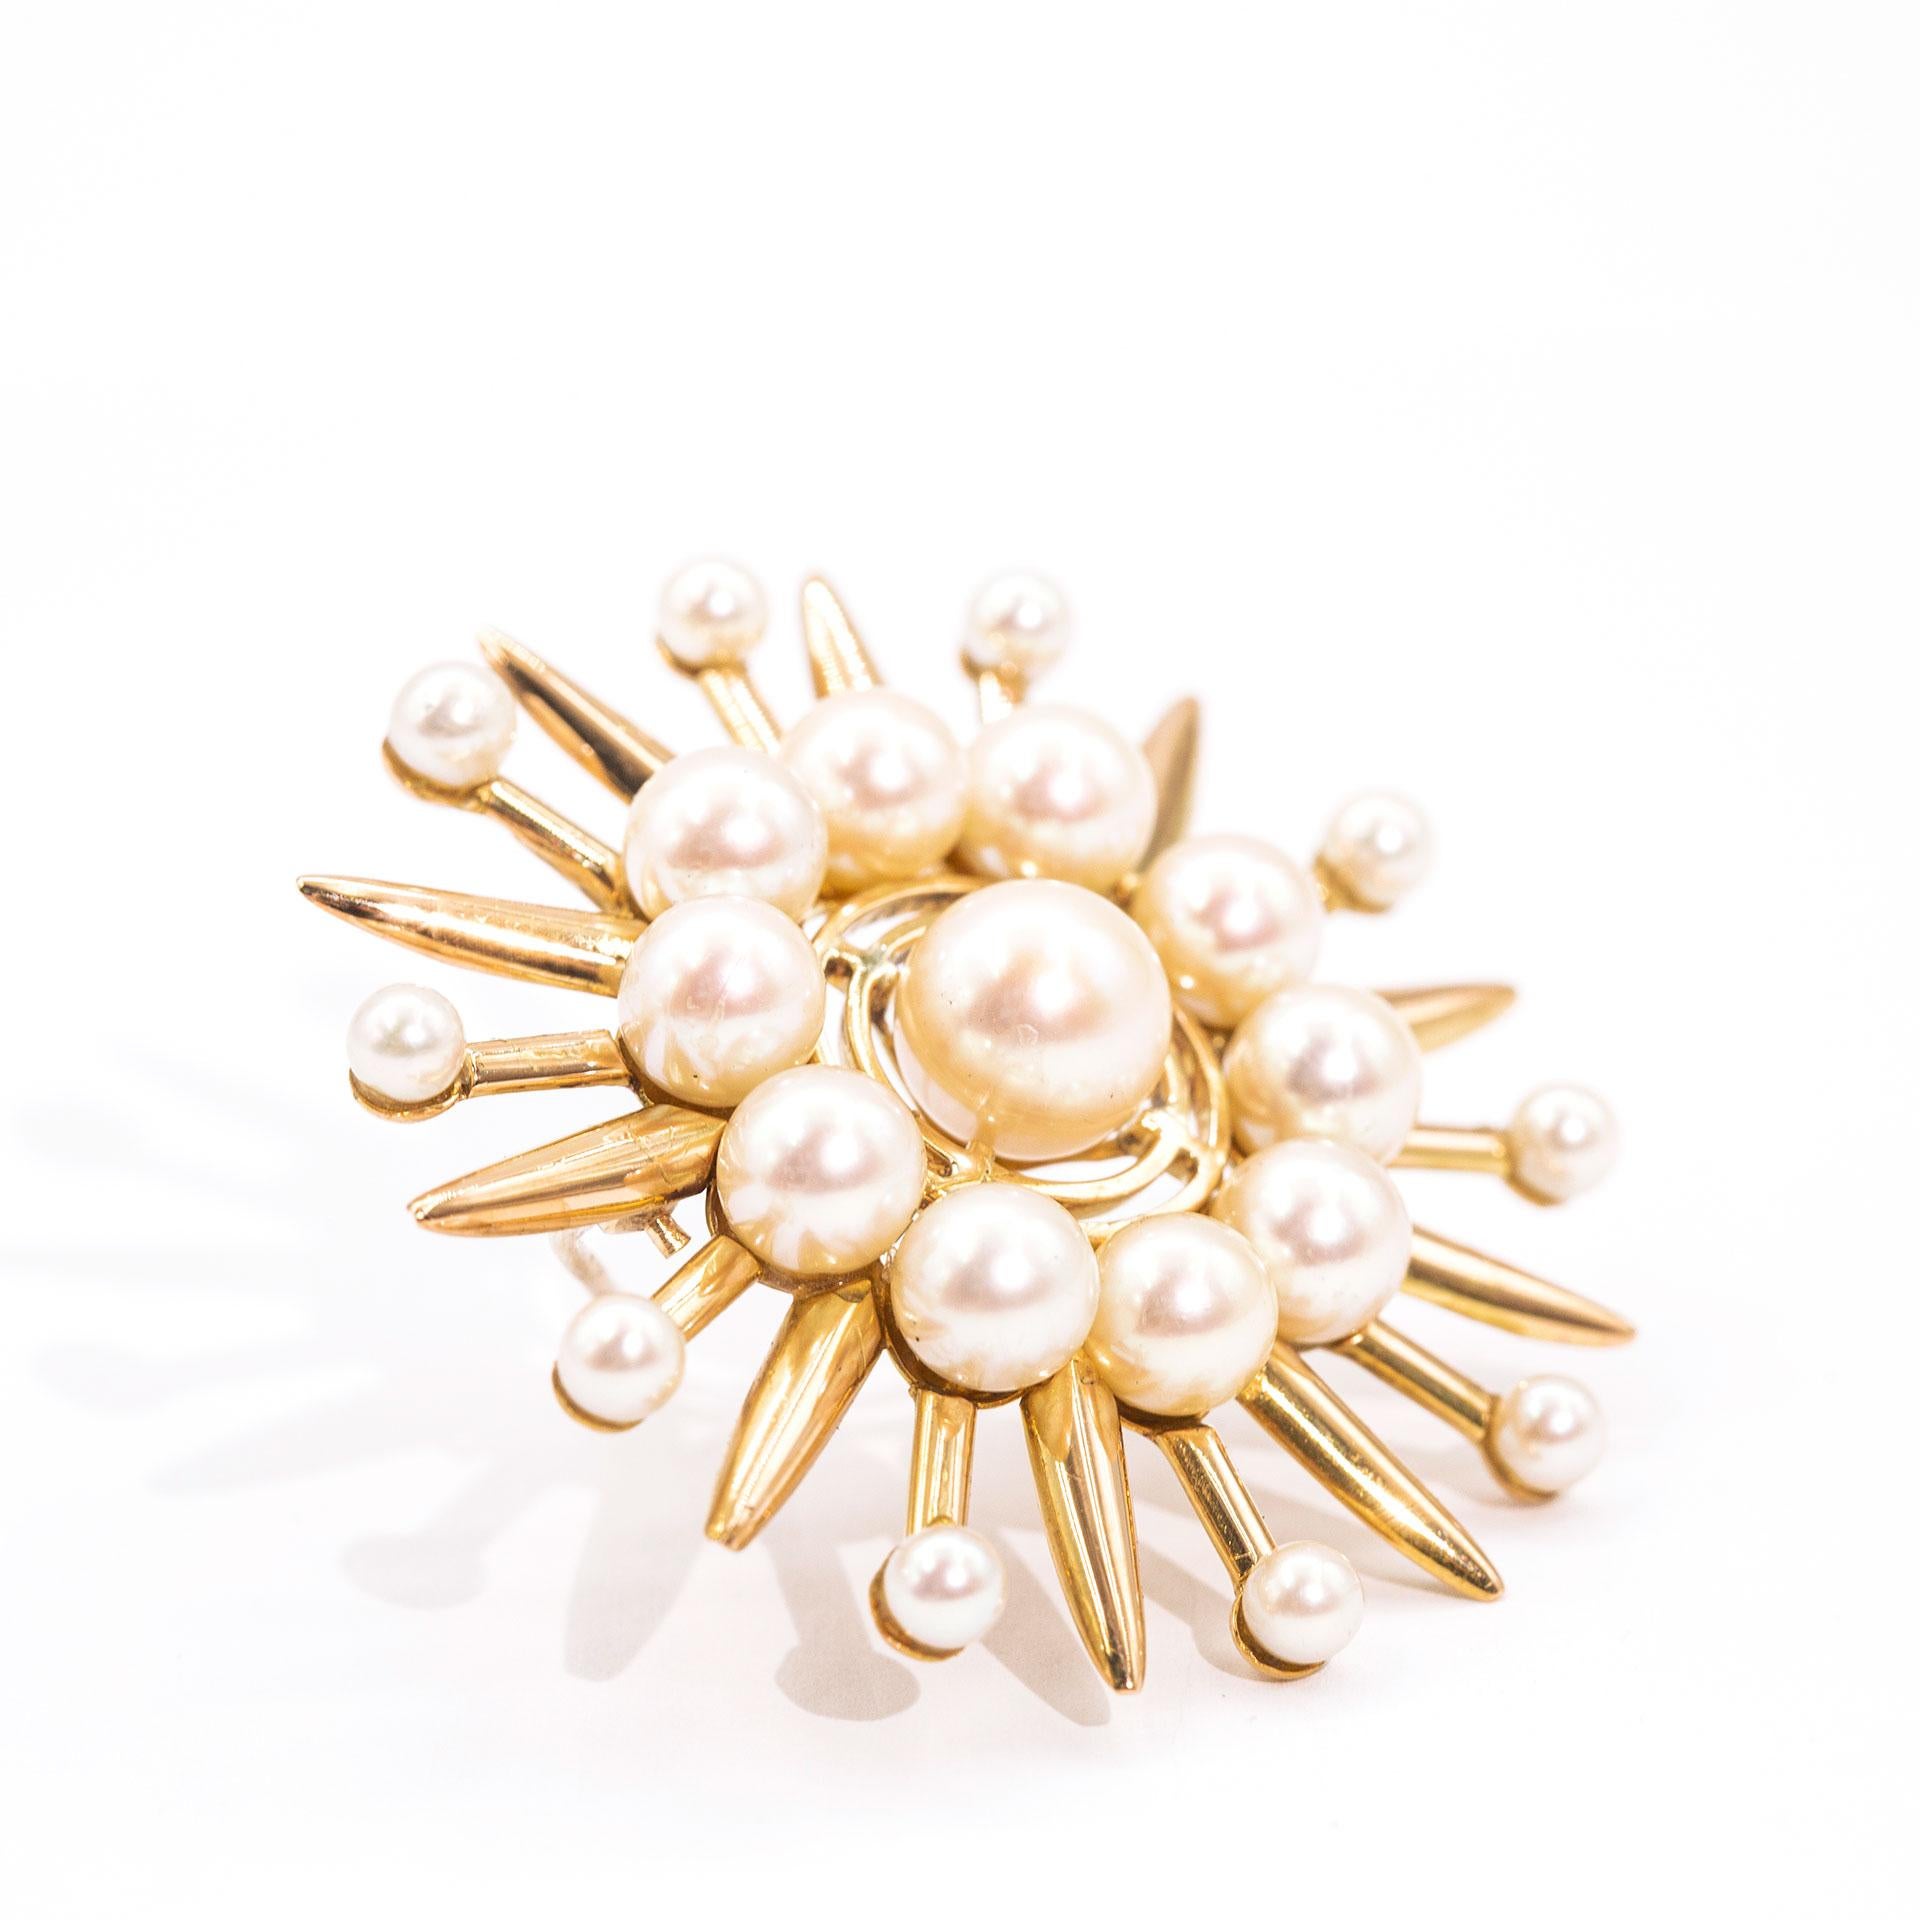 Forged in 18 carat yellow gold is this charming vintage brooch, Circa 1900s, which features a cluster of 11 slightly off round cultured pearls and is further surrounded by a border of 10 smaller freshwater white pearls.   Both the cultured and